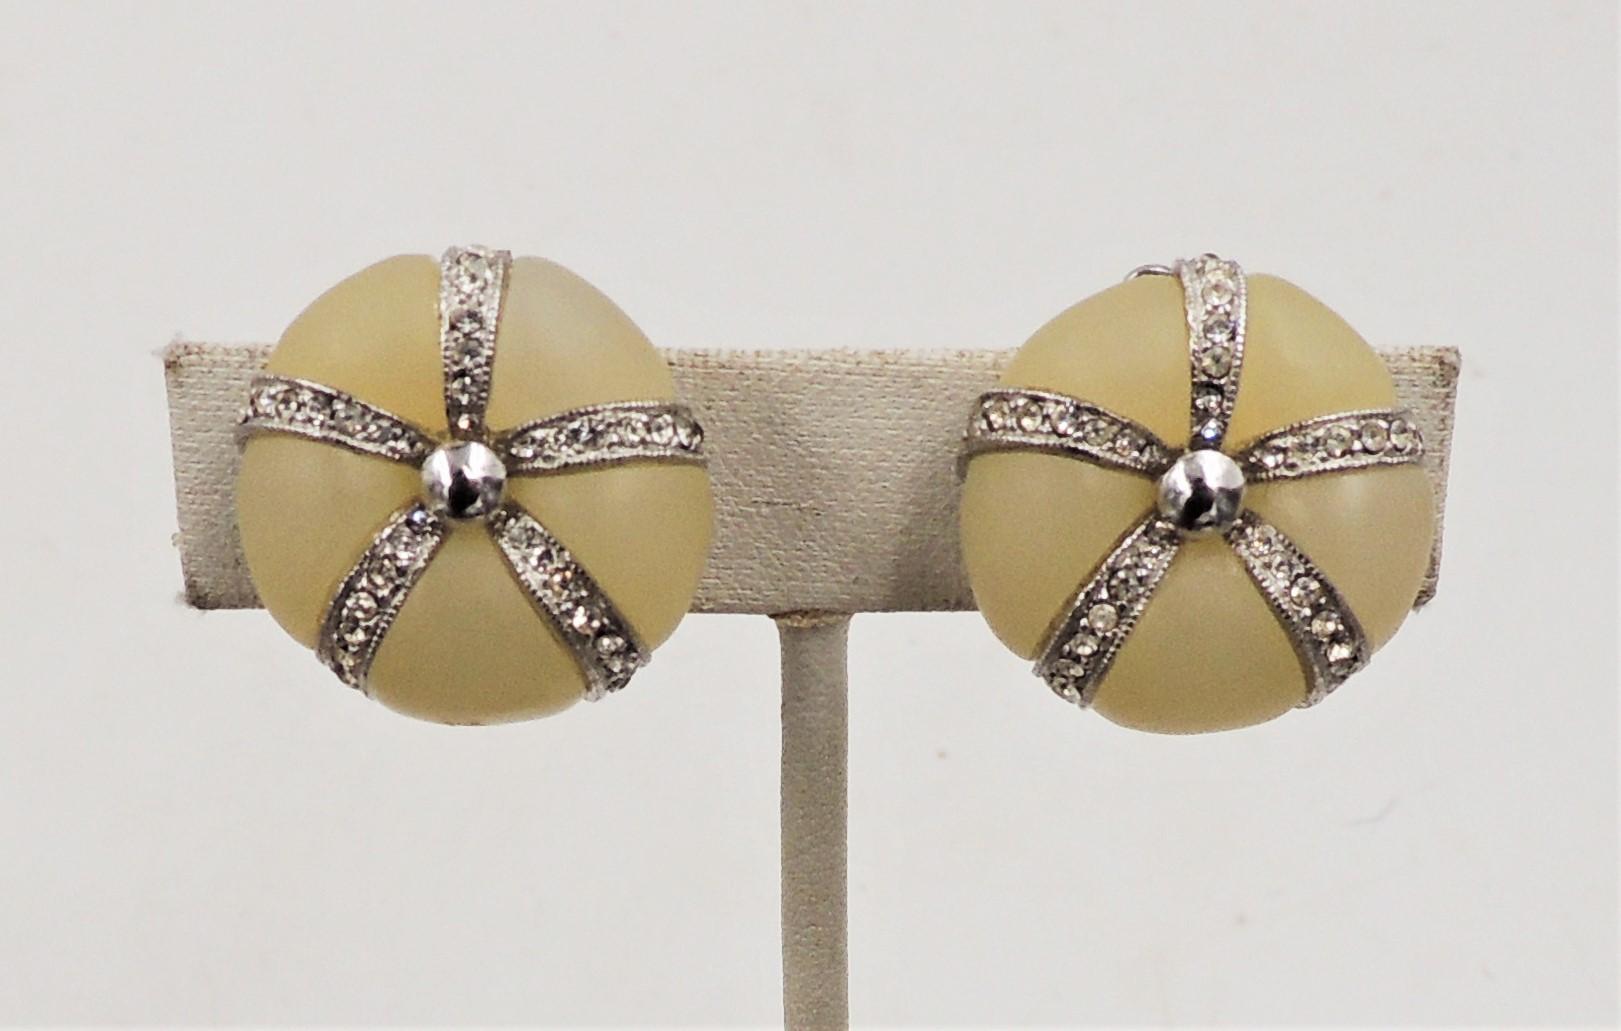 Vintage 1970s Signed Hattie Carnegie Domed Lucite Rhinestone Clip Earrings In Excellent Condition For Sale In Easton, PA